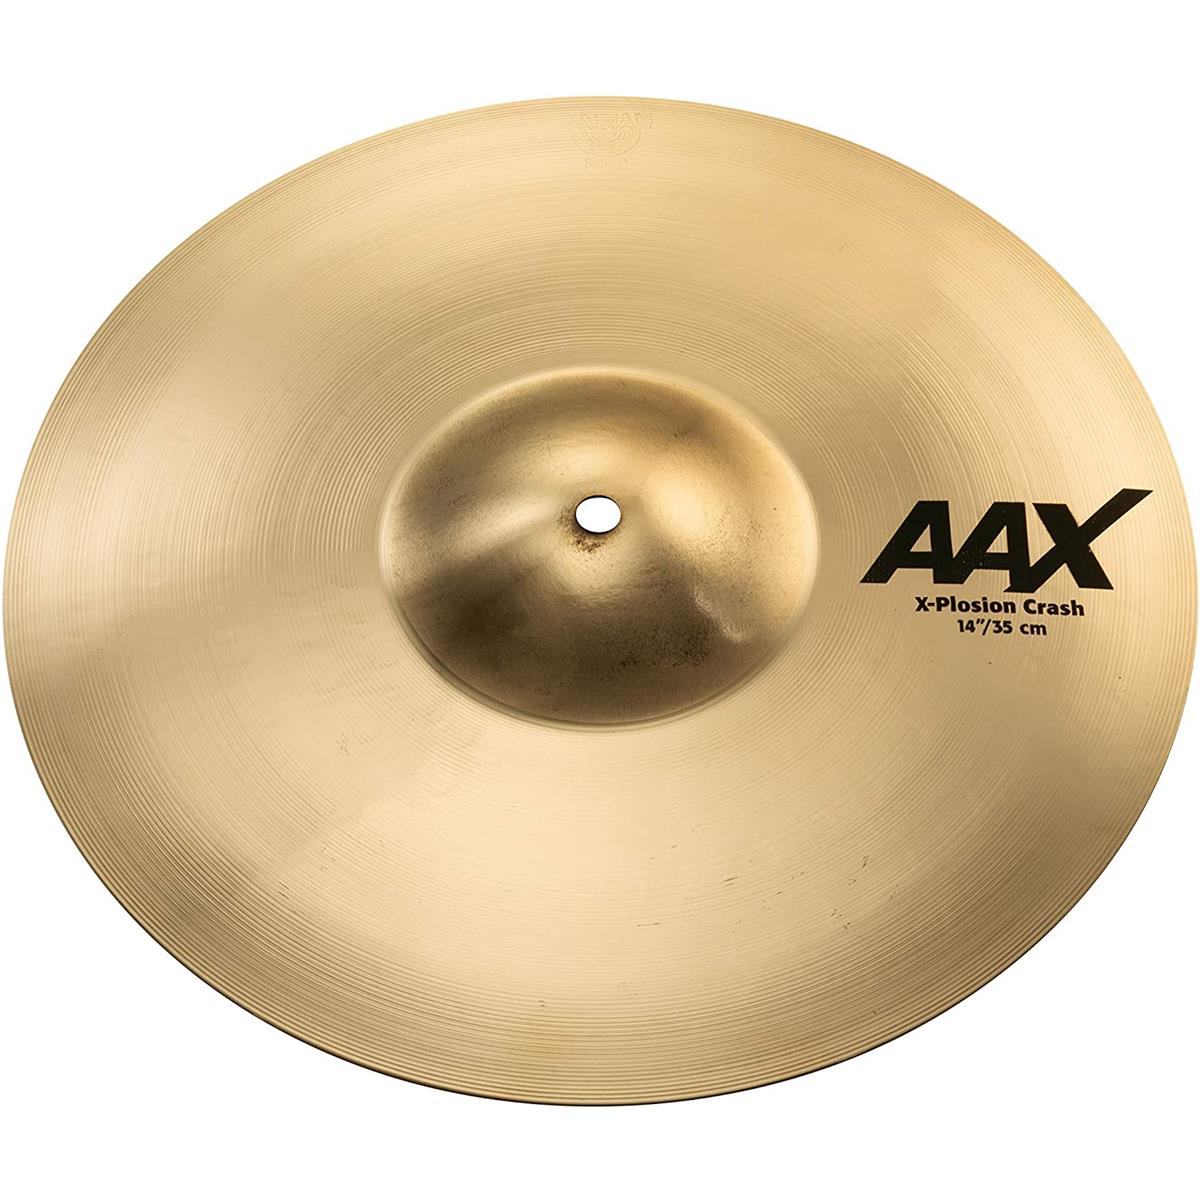 Sabian 14" AAX X-Plosion Fast Crash Cymbal, Medium-Thin, Brilliant Finish Bursting with energy, the innovative SABIAN 14" AAX X-Plosion Crash explodes with fuller, punchier power. Also available in an XT Fast Crash model and 11" AAX Splash. The SABIAN AAX series delivers consistently bright, crisp, clear and cutting responses - AAX is the ultimate Modern Bright sound!